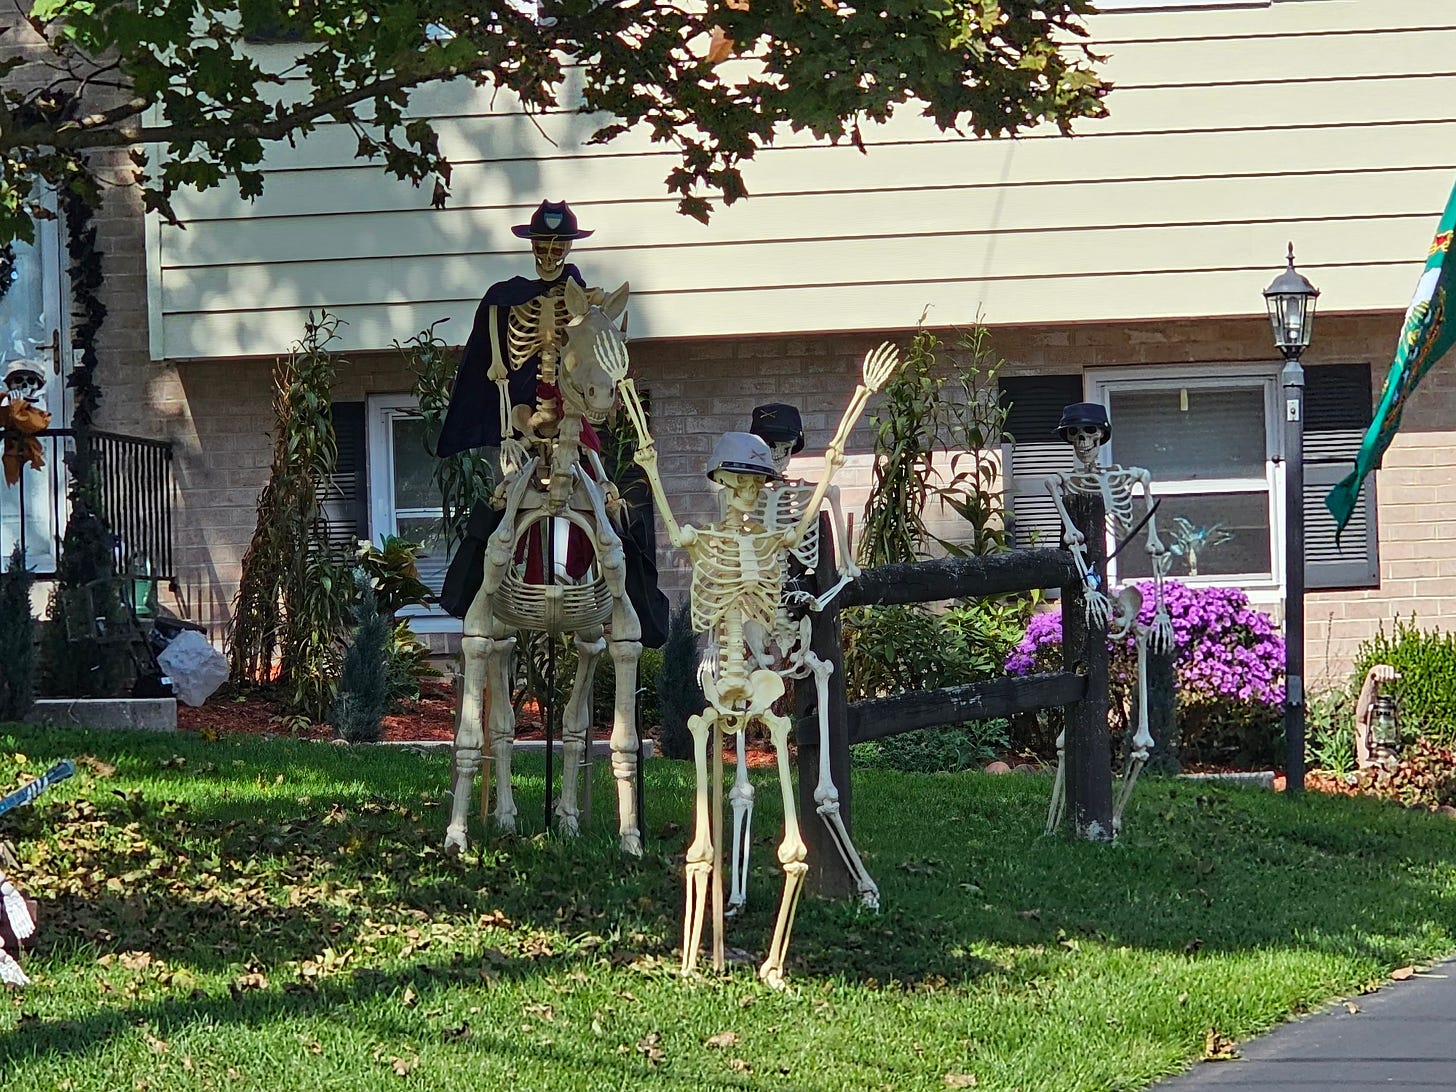 A skeleton with his hands up in front of one of a horse and two others with guns.